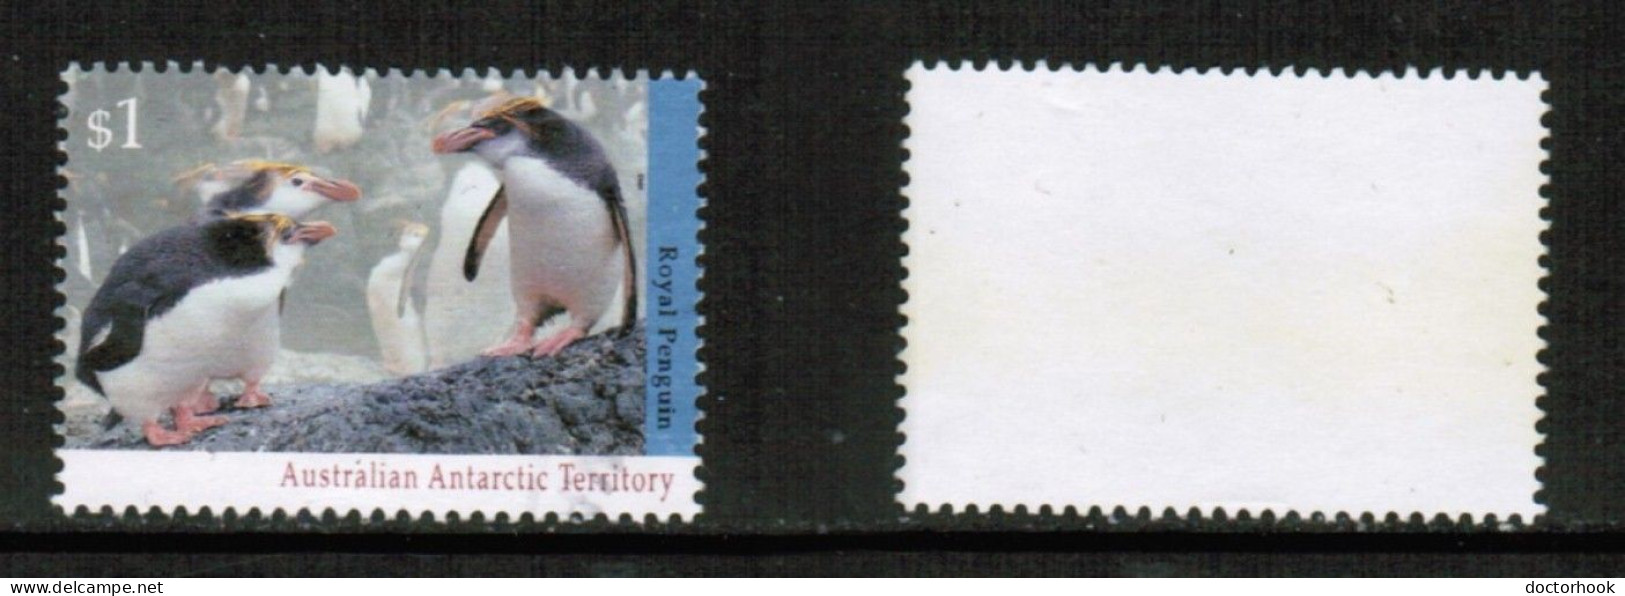 AUSTRALIAN ANTARCTIC TERRITORY   Scott # L 86A USED (CONDITION AS PER SCAN) (Stamp Scan # 928-6) - Gebraucht